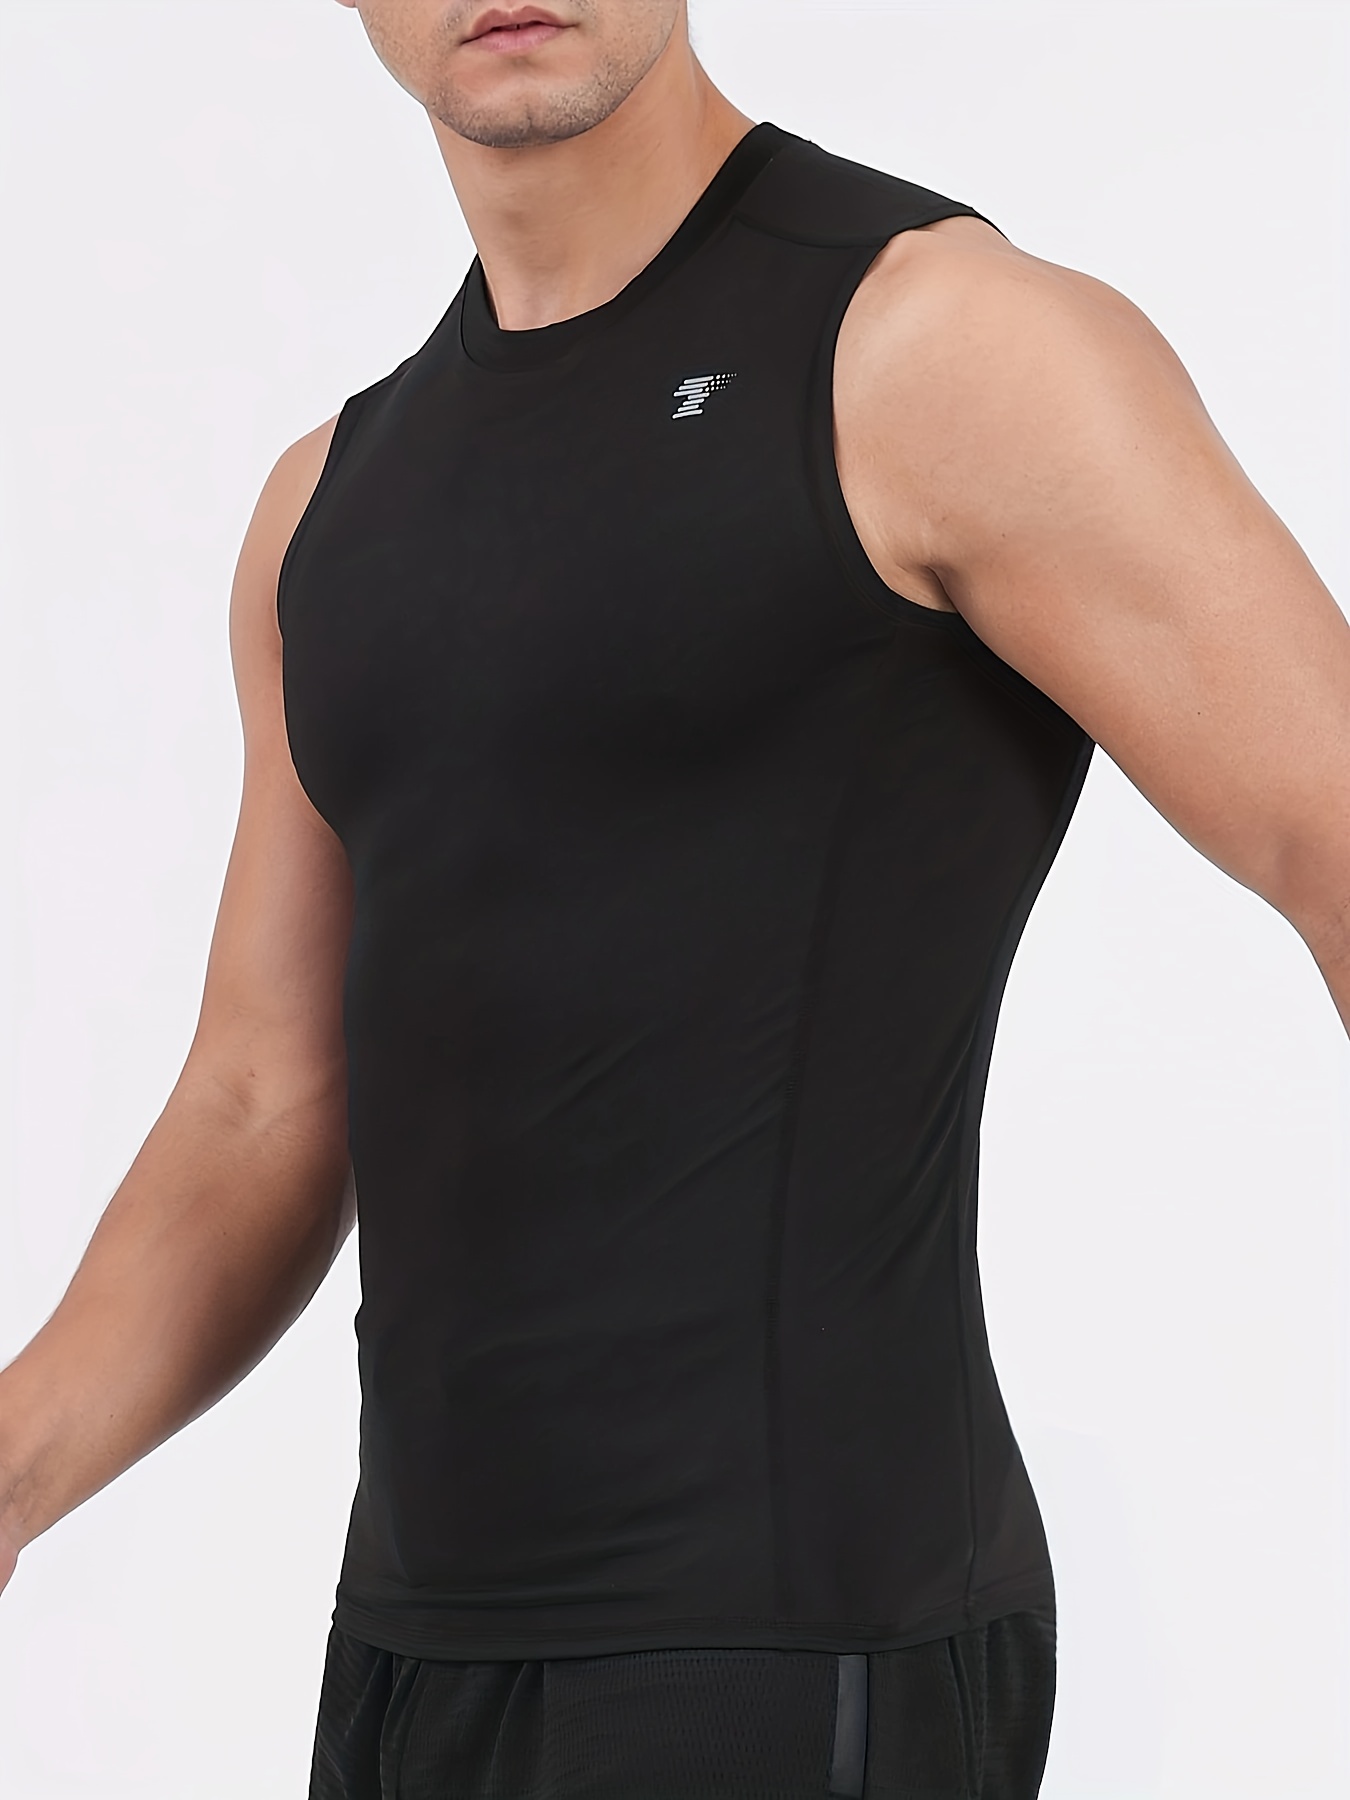 Men's Active Tank Tops: Moisture-wicking, Sun Protection & Compression